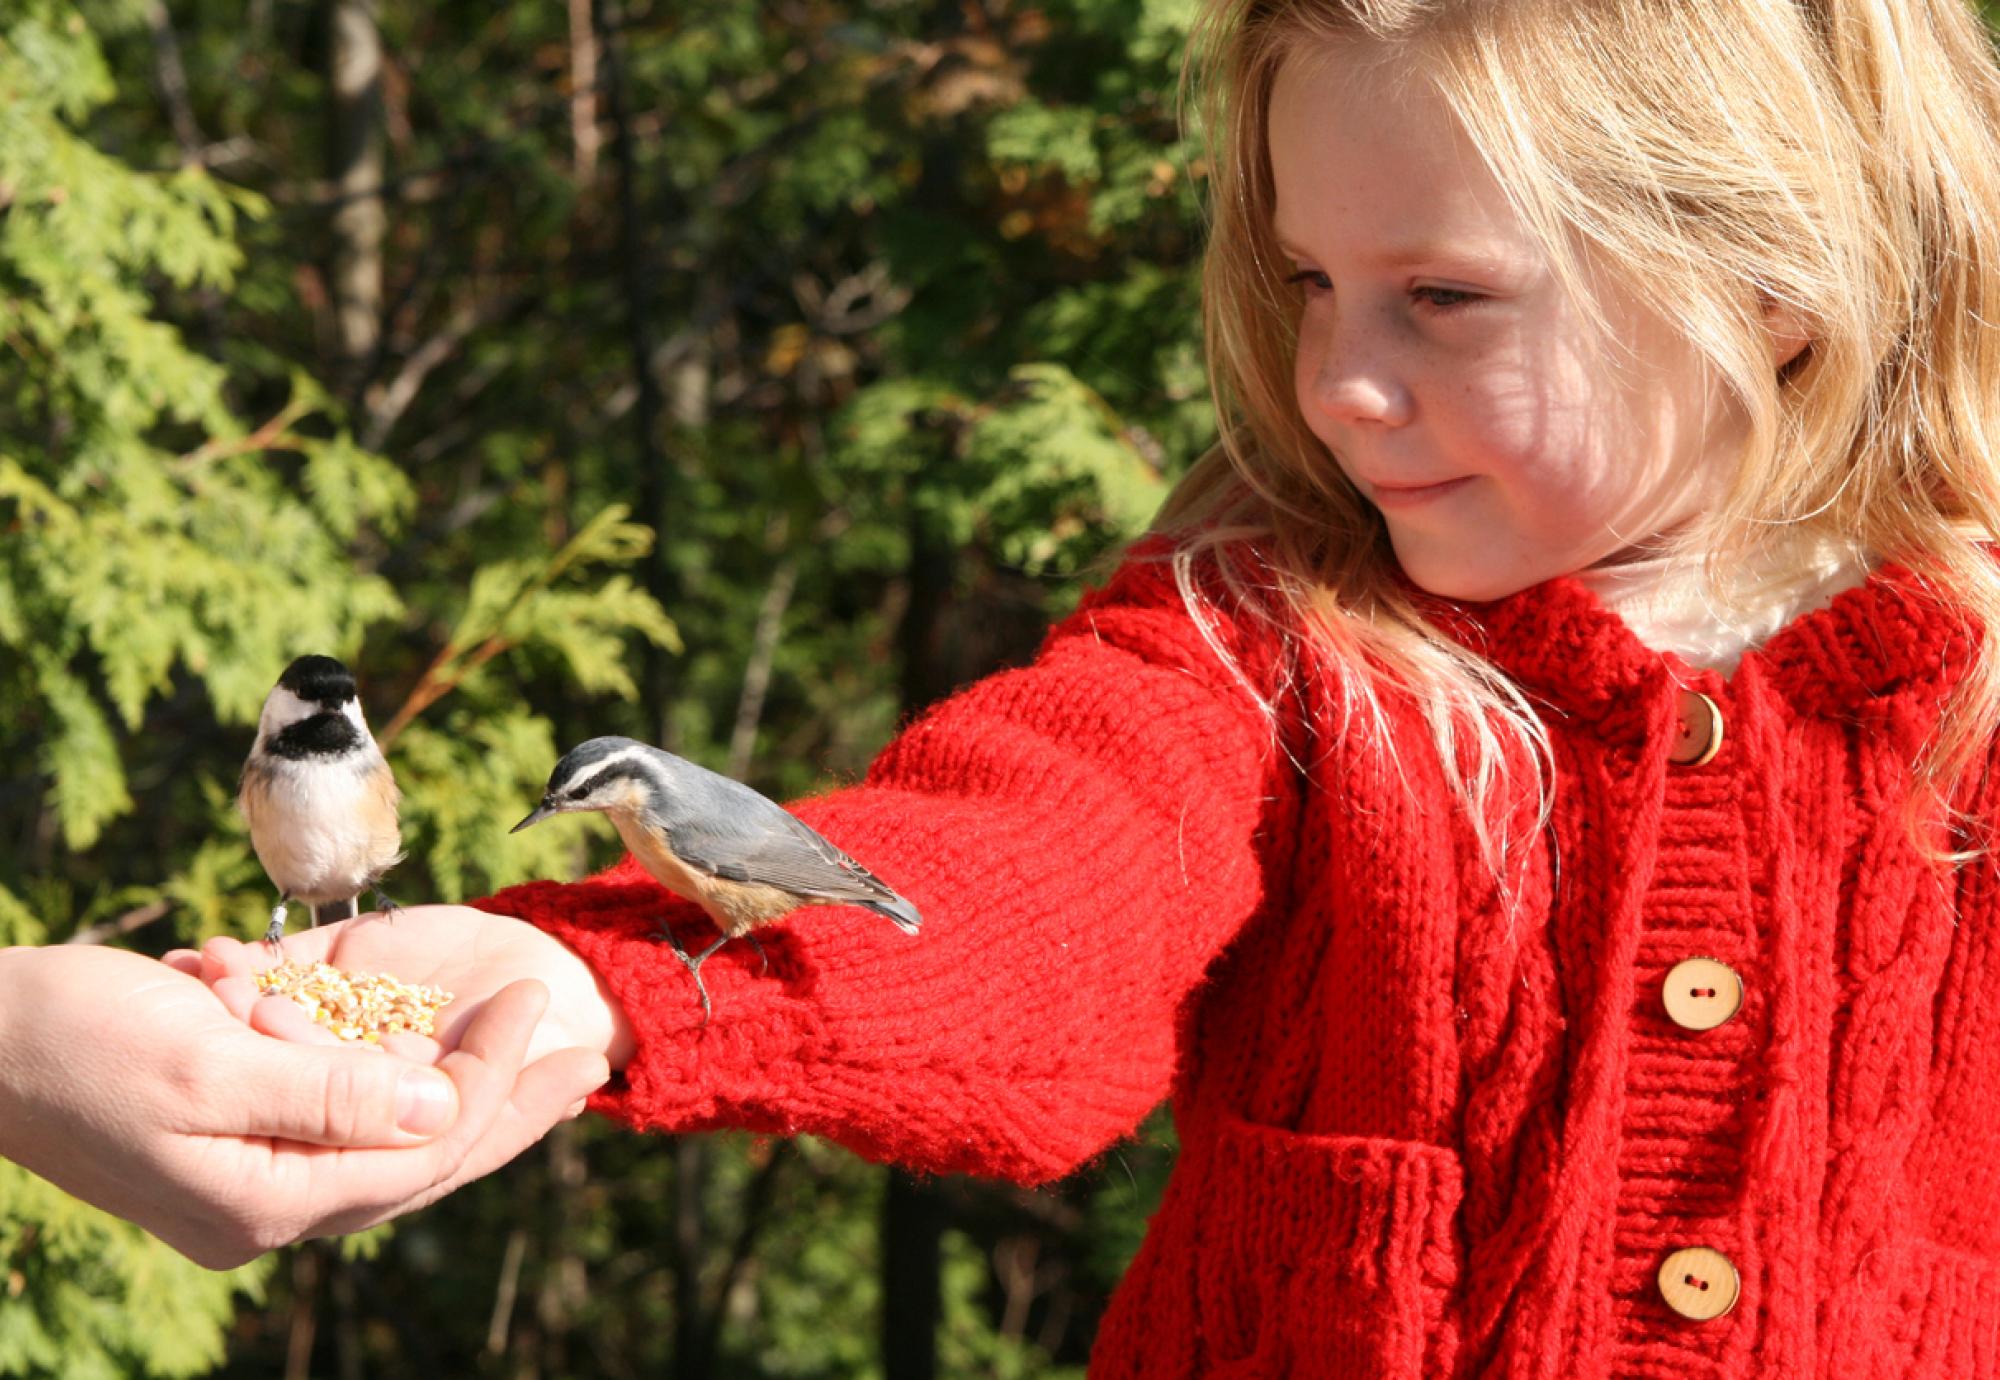 Girl helping feed a bird perched on her hand